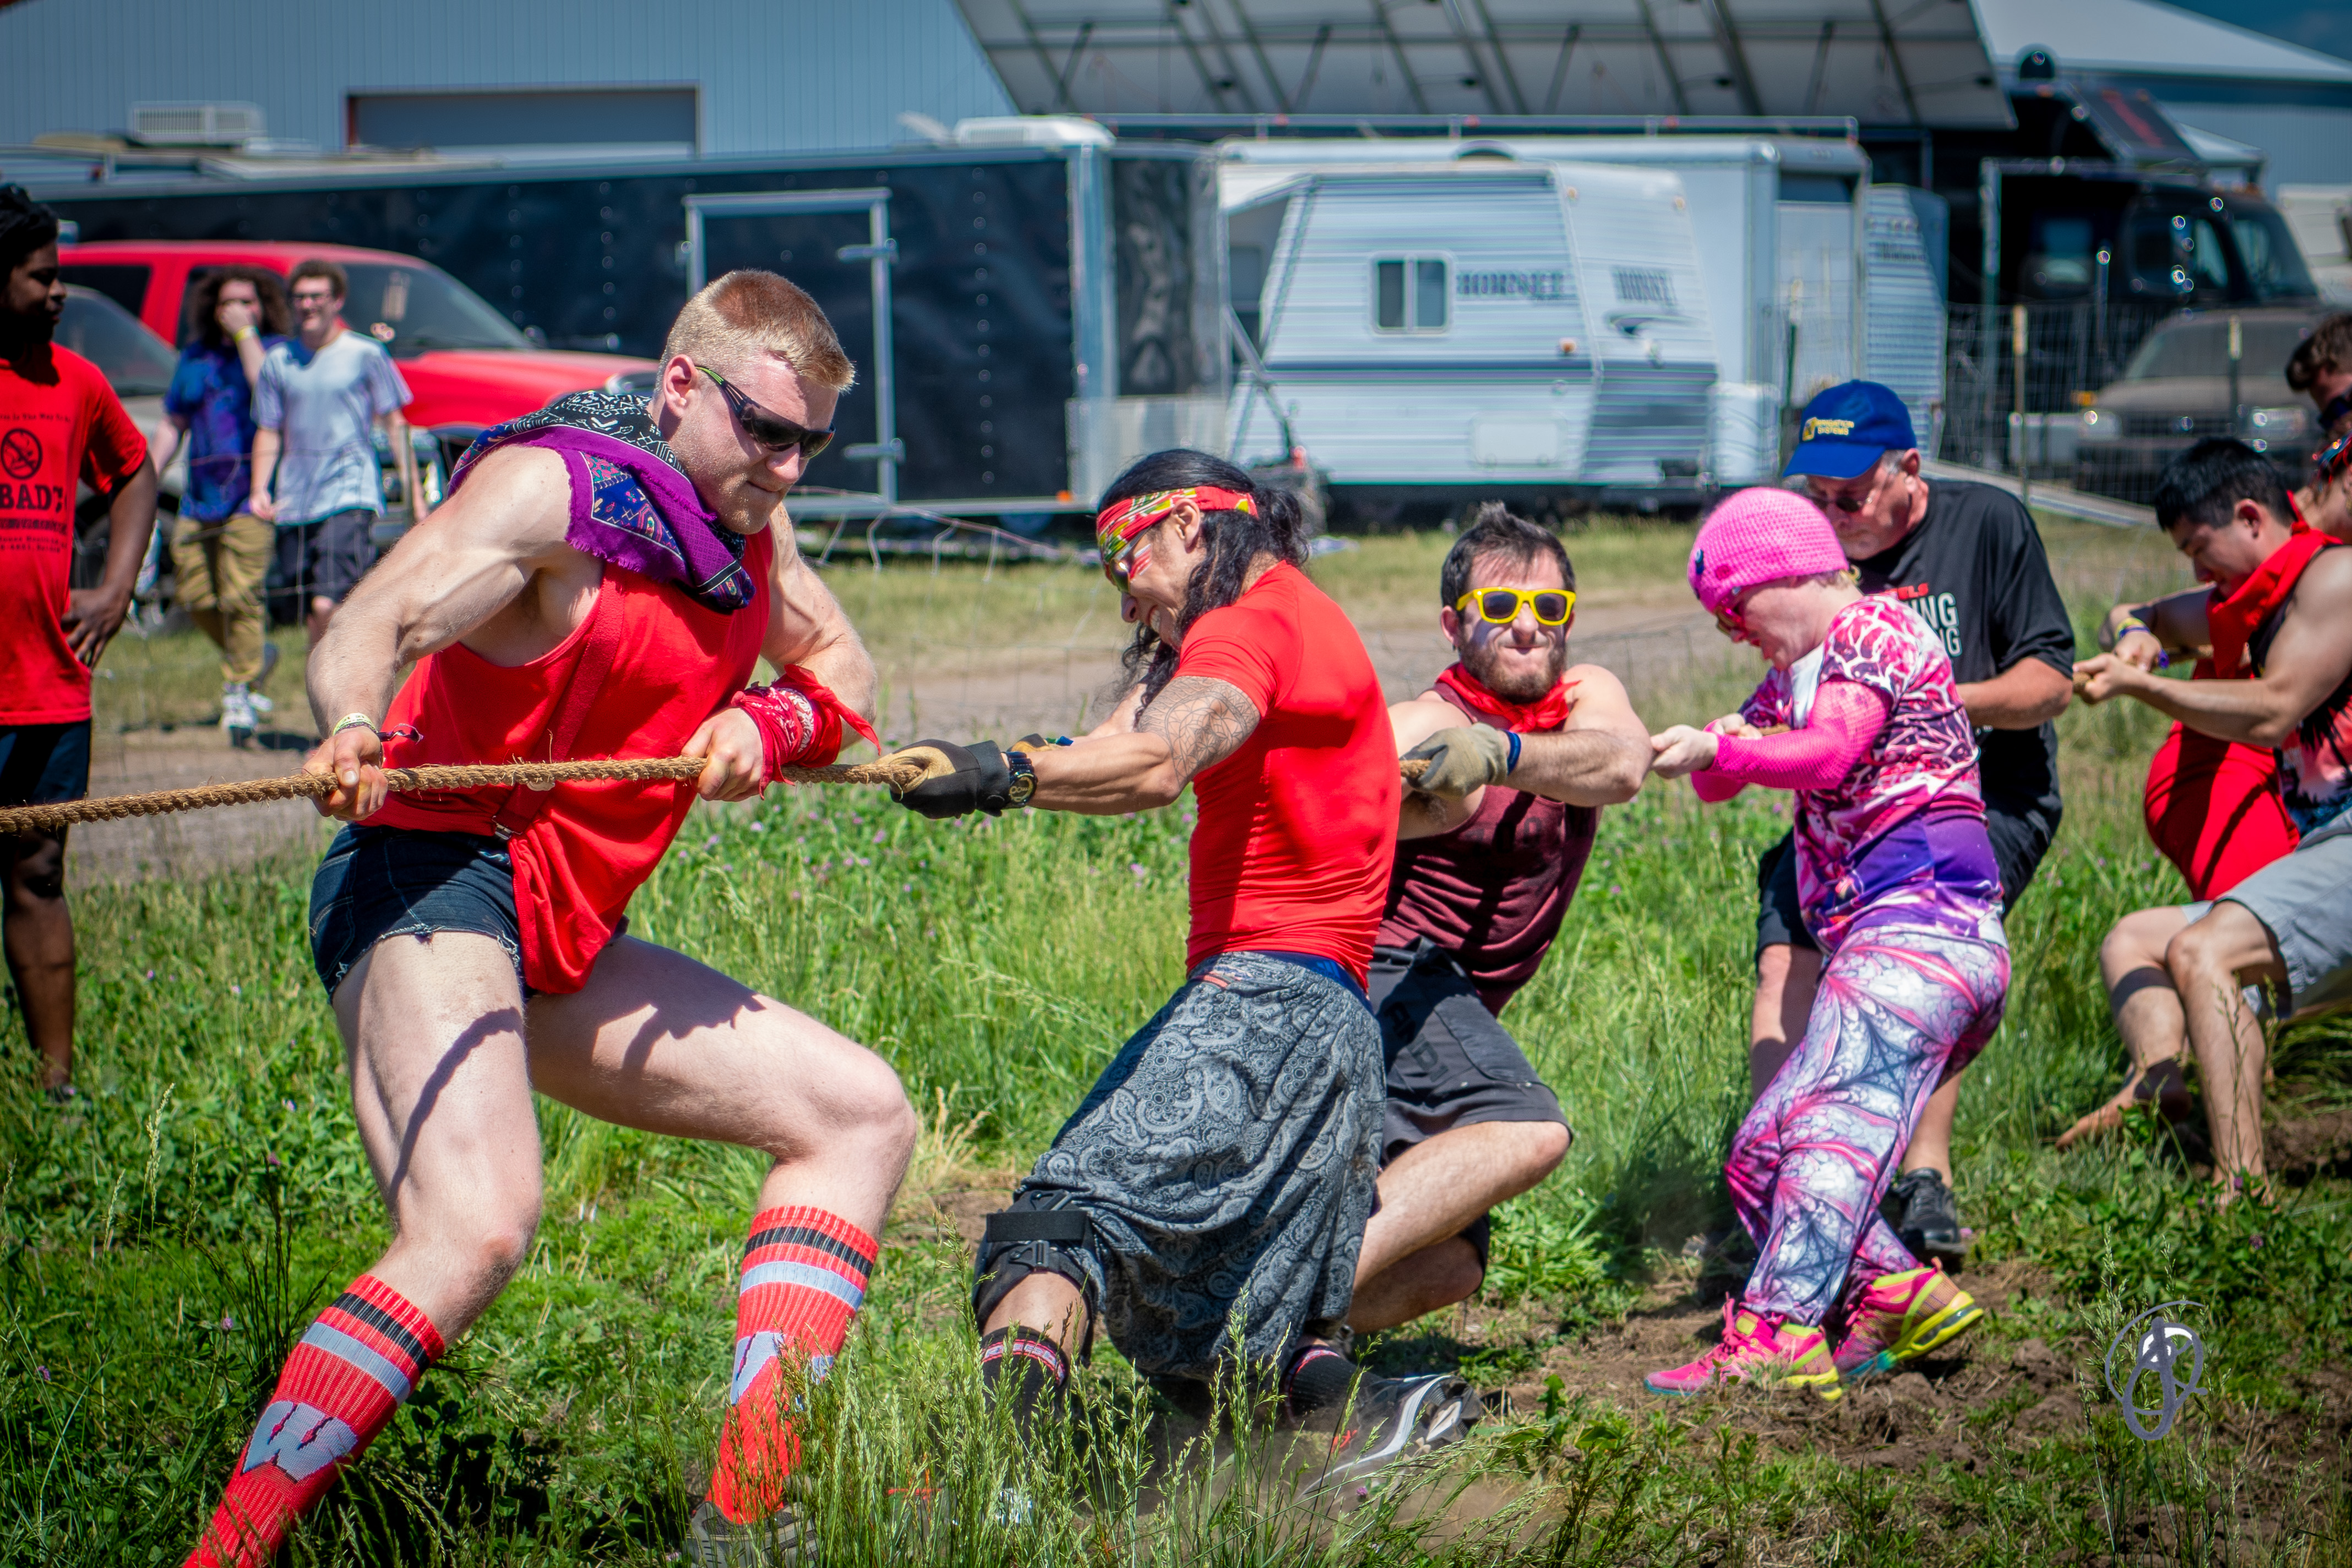 Tug of War | Summer Camp Field Day Activities | Saturday 5/28